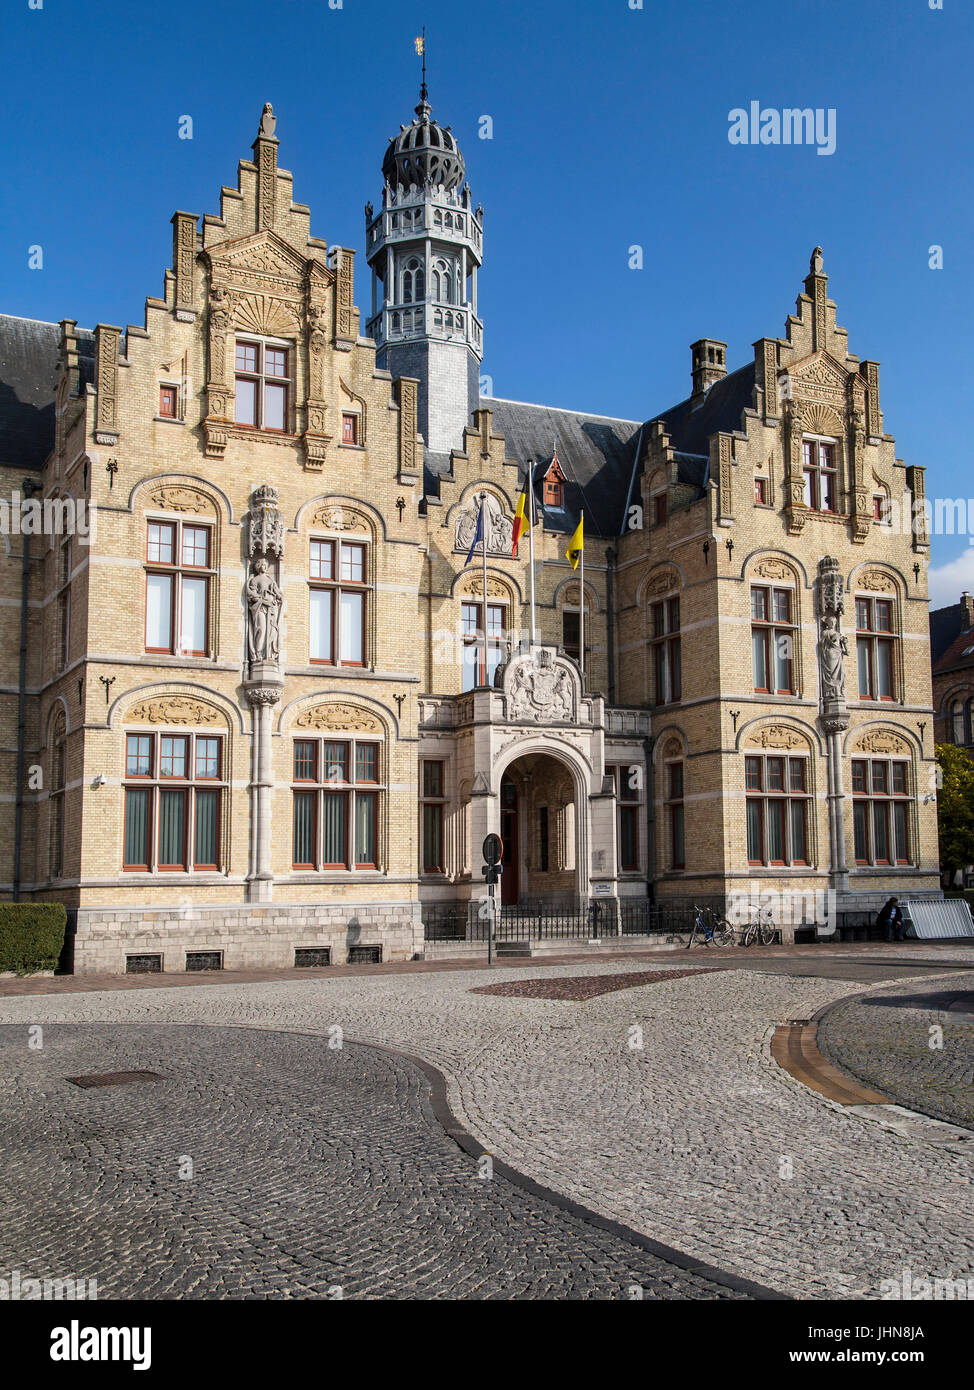 Building of the Court of Justice in the Market Square of Ypres, West Flanders, Belgium. Stock Photo